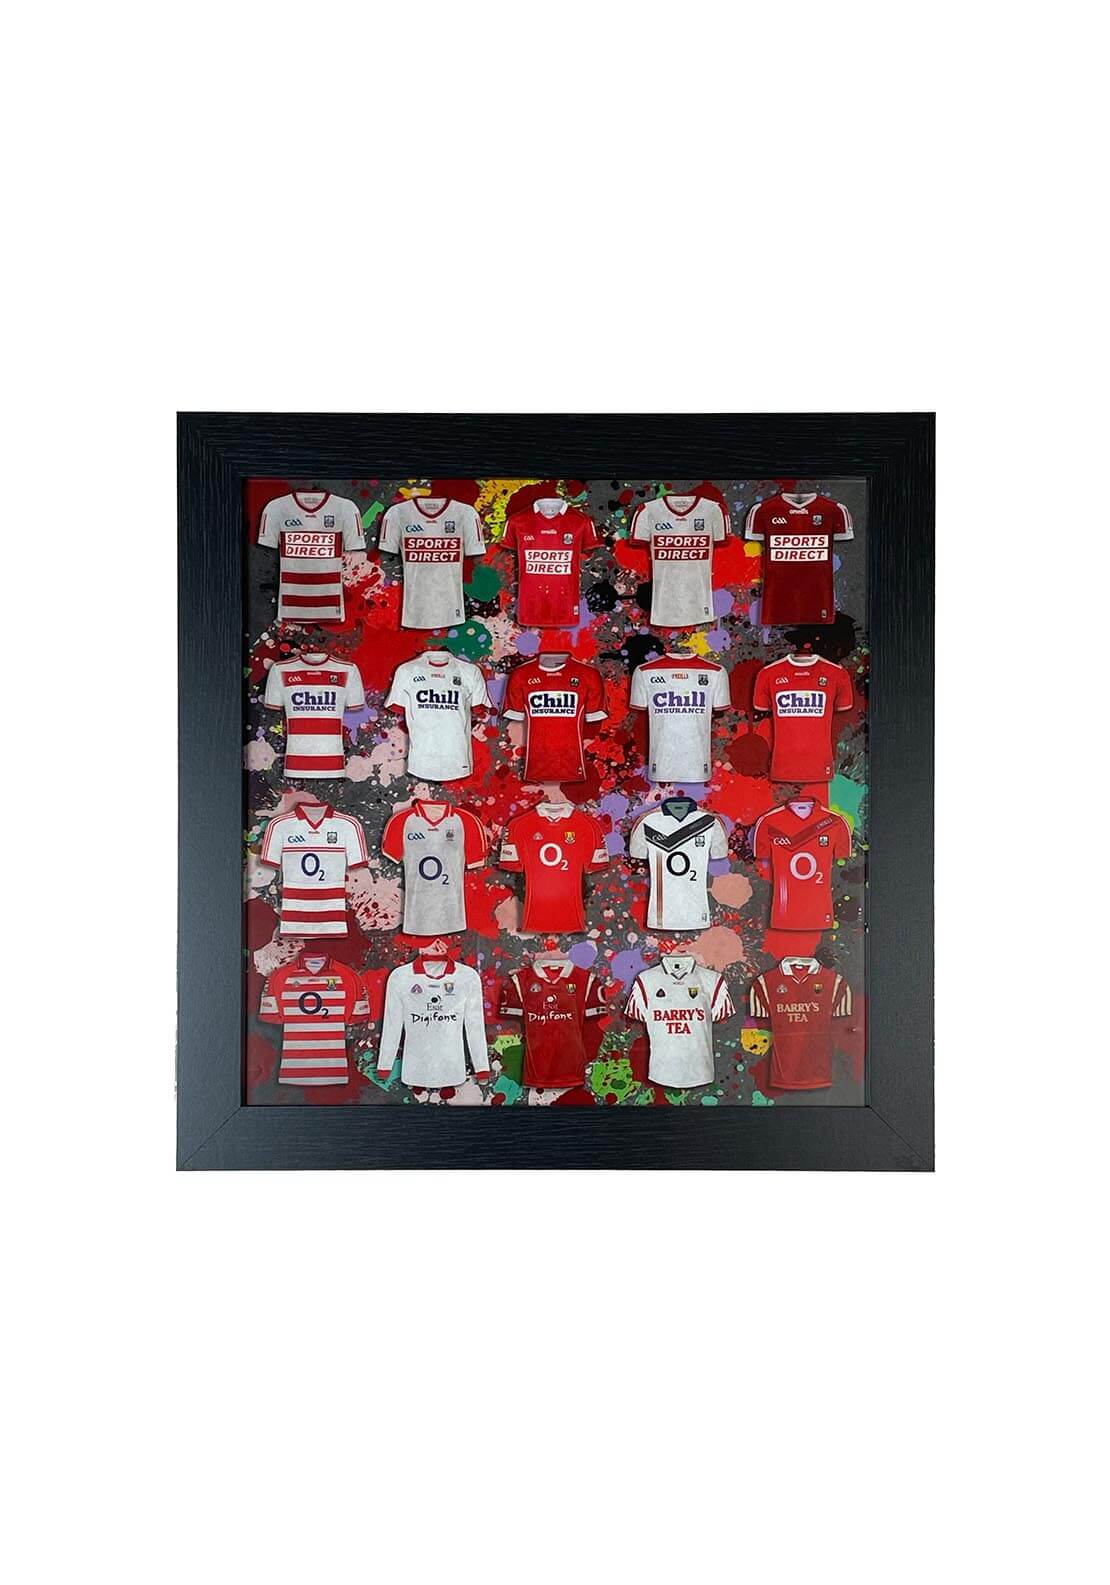 The Home Collection Cork GAA Framed Picture 40cm x 40cm - Black 1 Shaws Department Stores